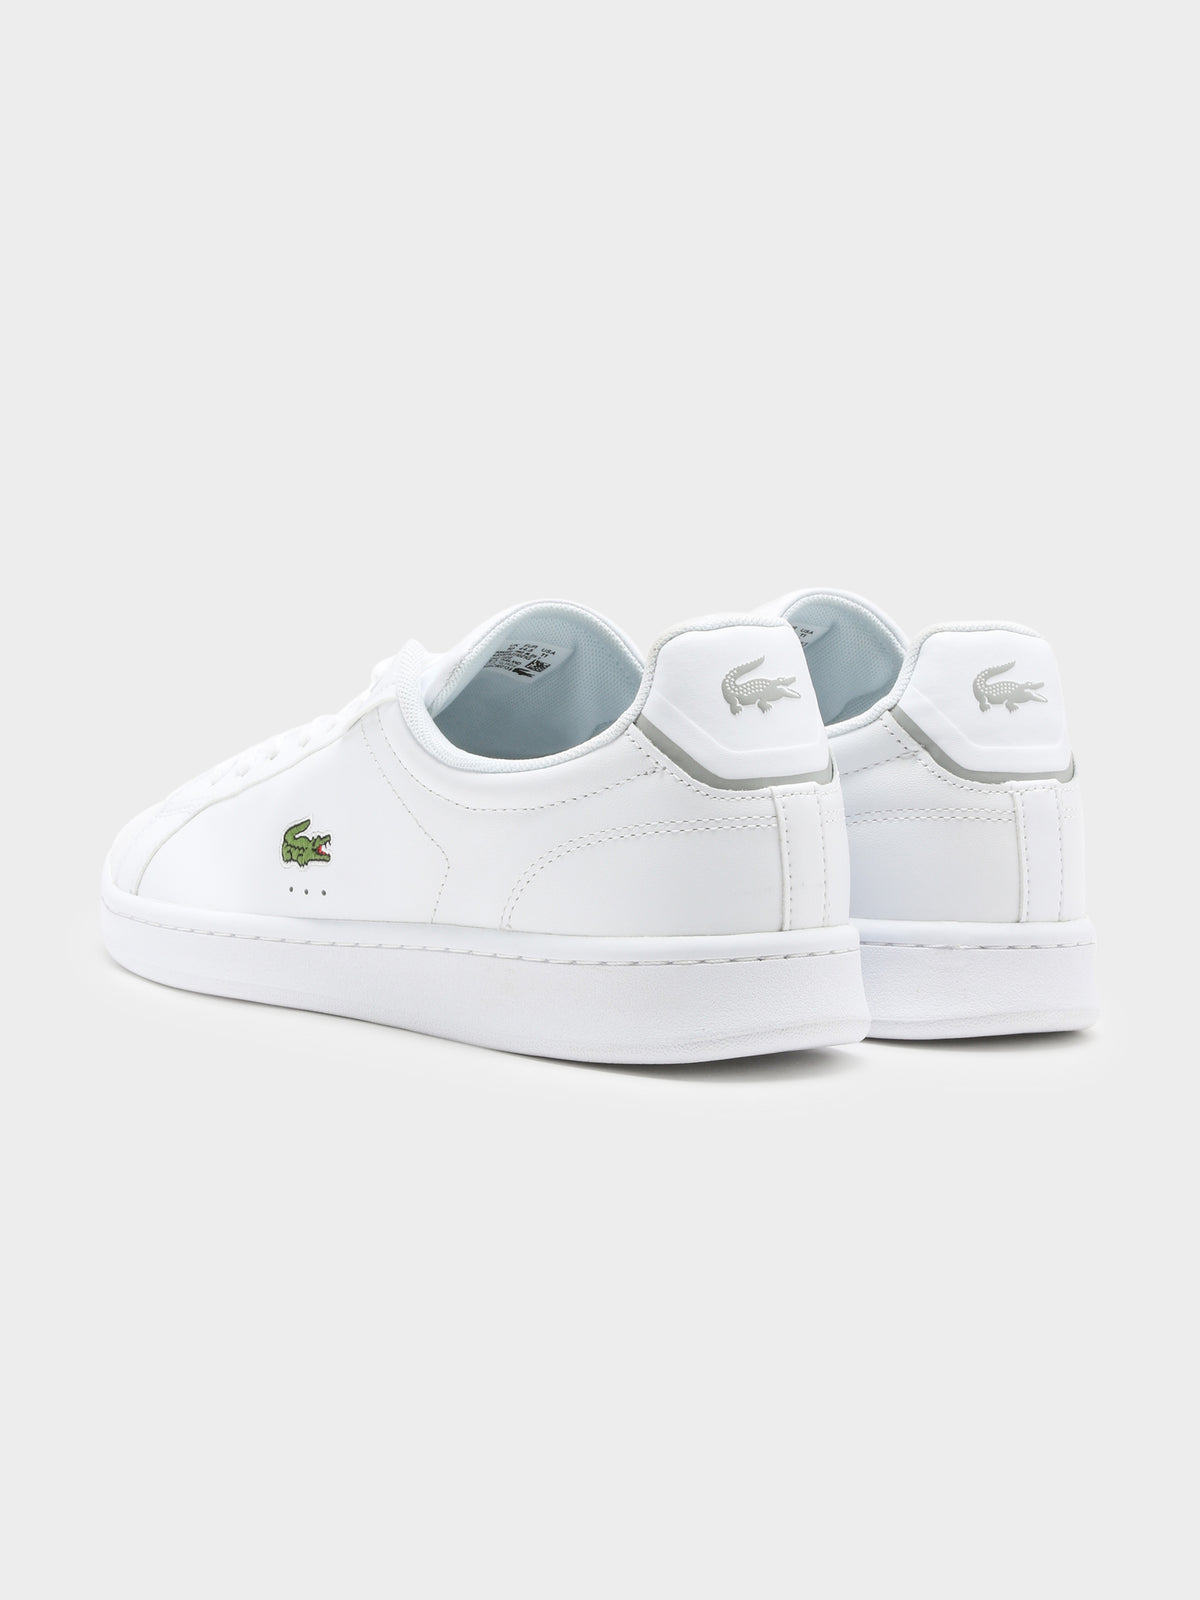 Mens Carnaby Pro BL23 Sneakers in White